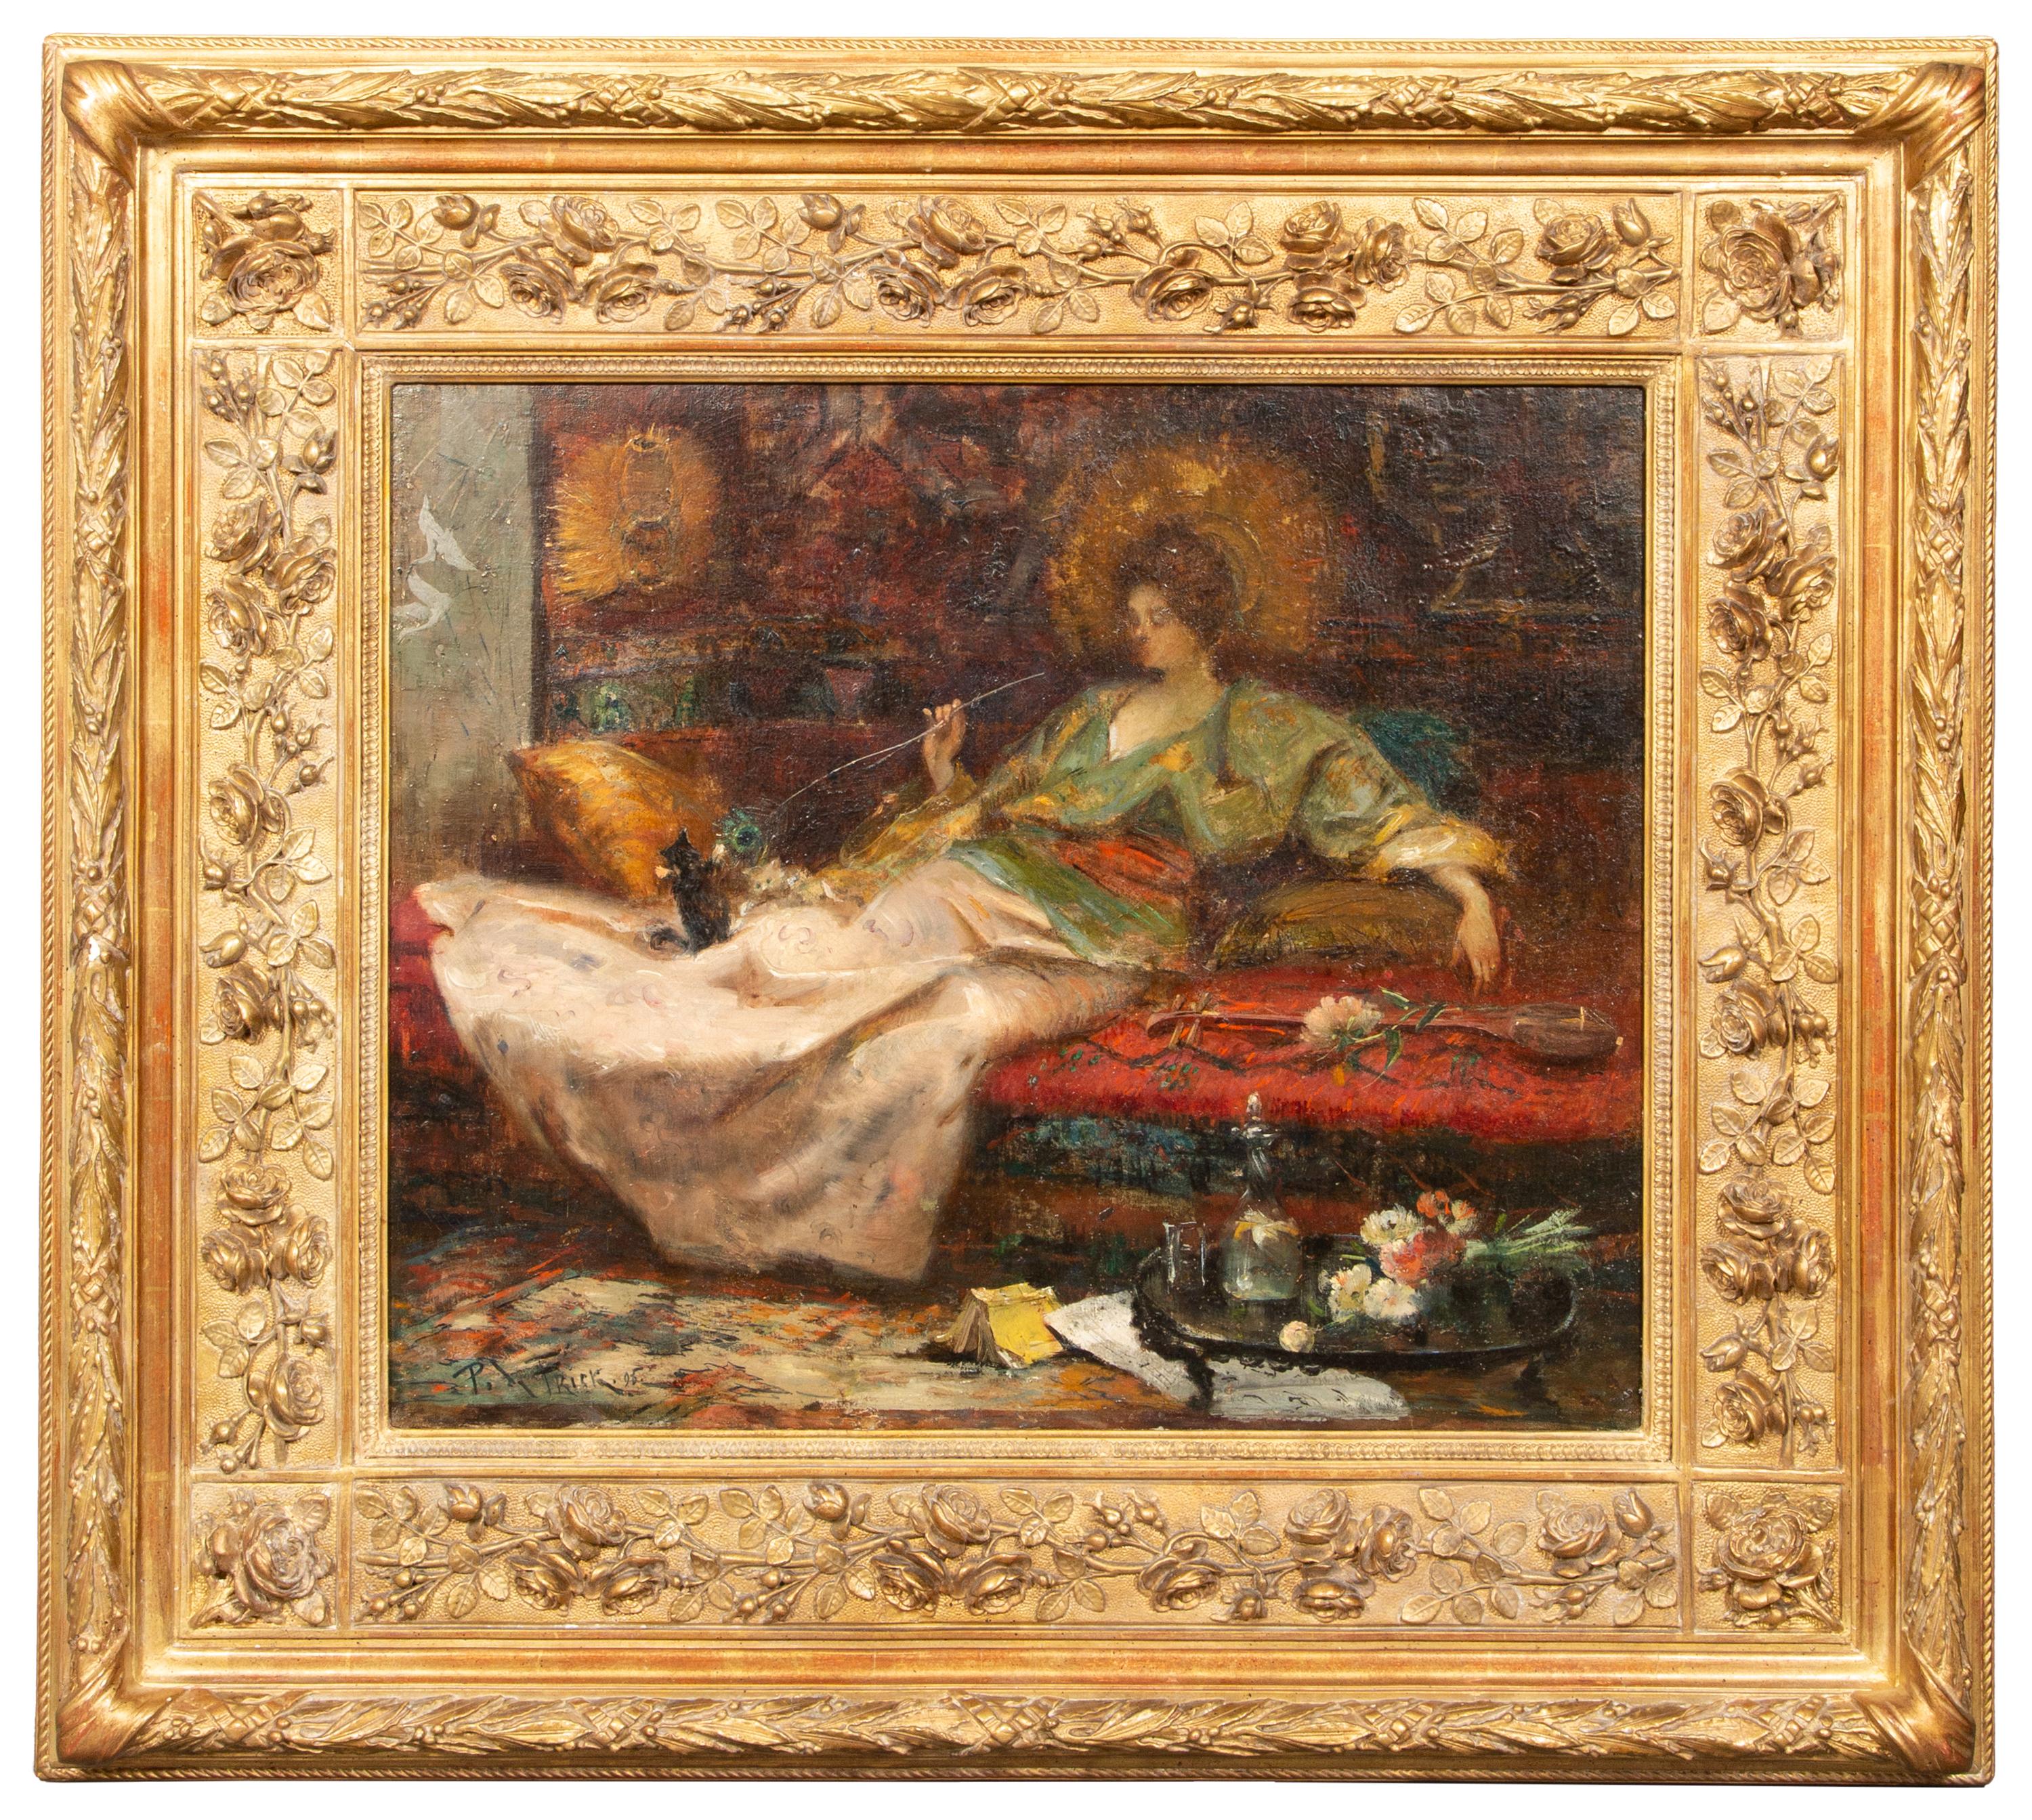 PAUL DE FRICK Animal Painting - “A Lady playing with a Cat” by Paul De Frick (1864 - Paris - 1935), dated 1896